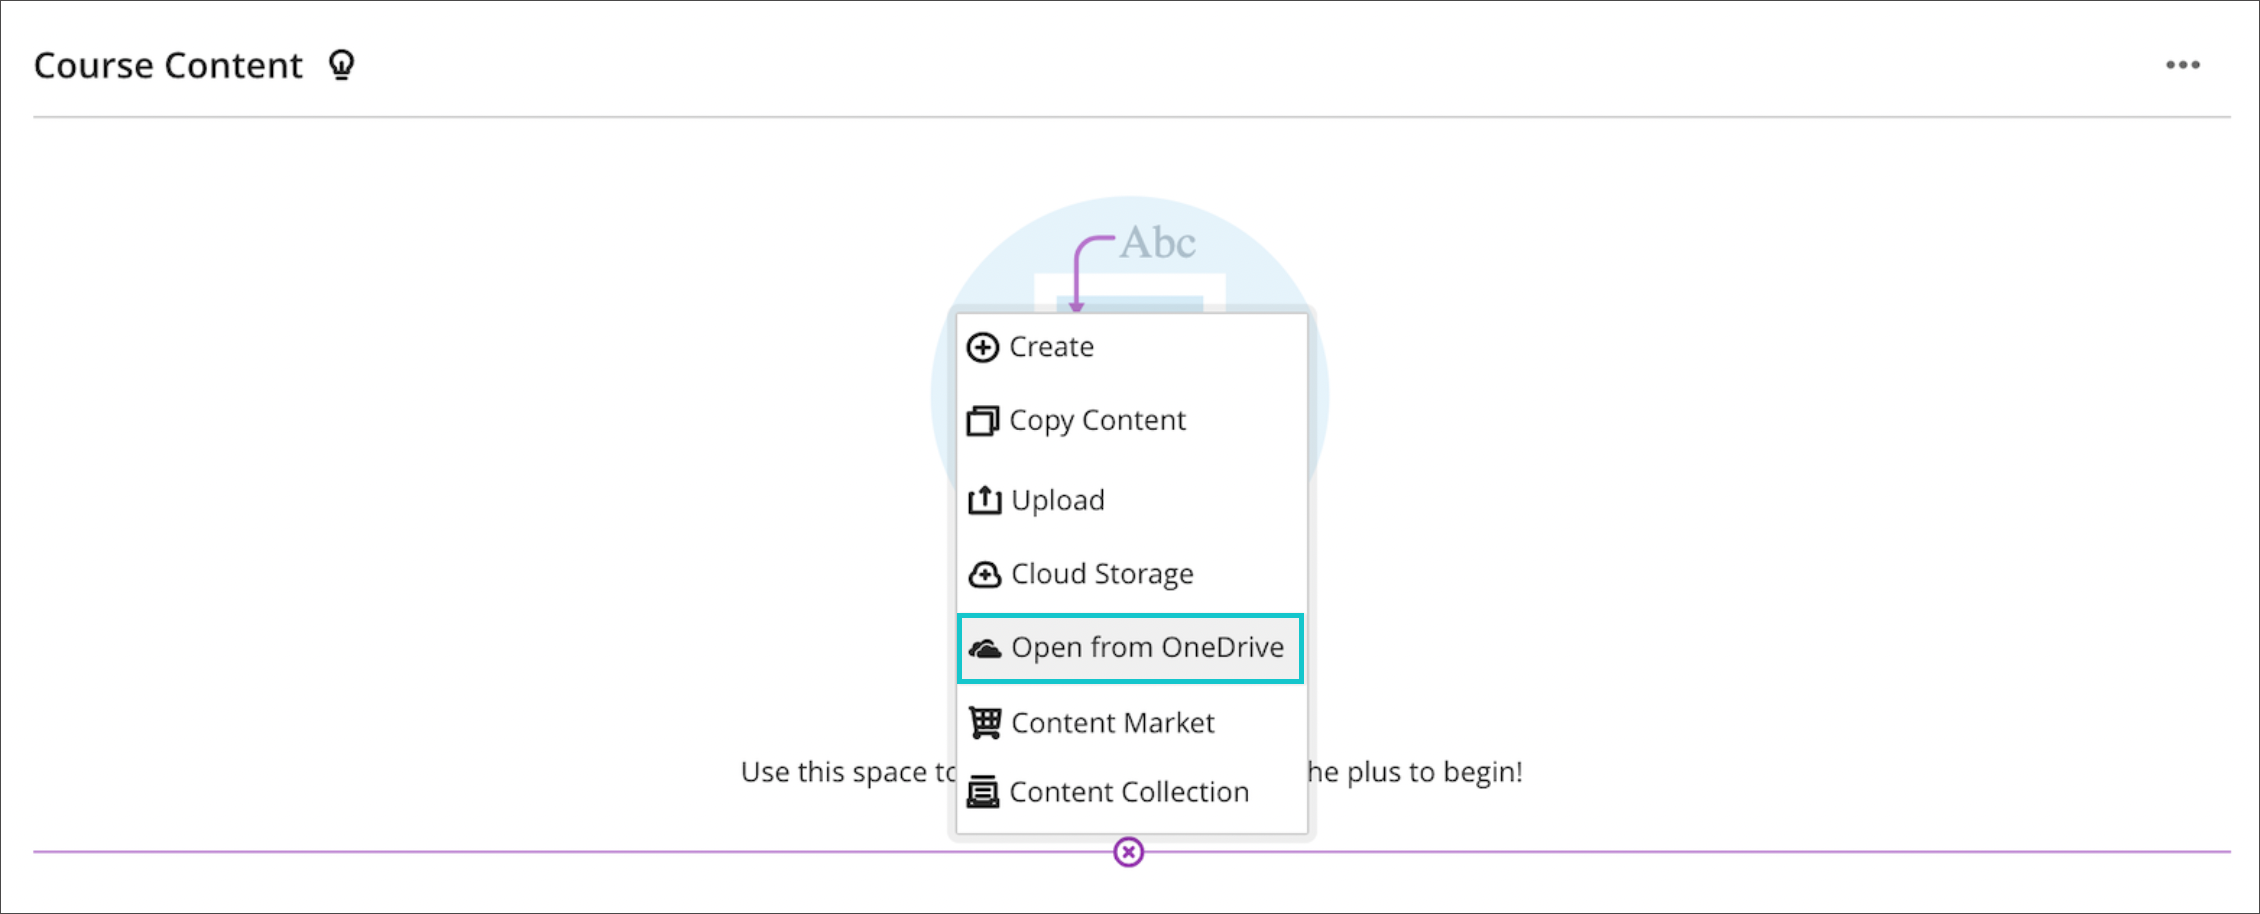 click the plus icon on the course content list to access the Open from OneDrive tool